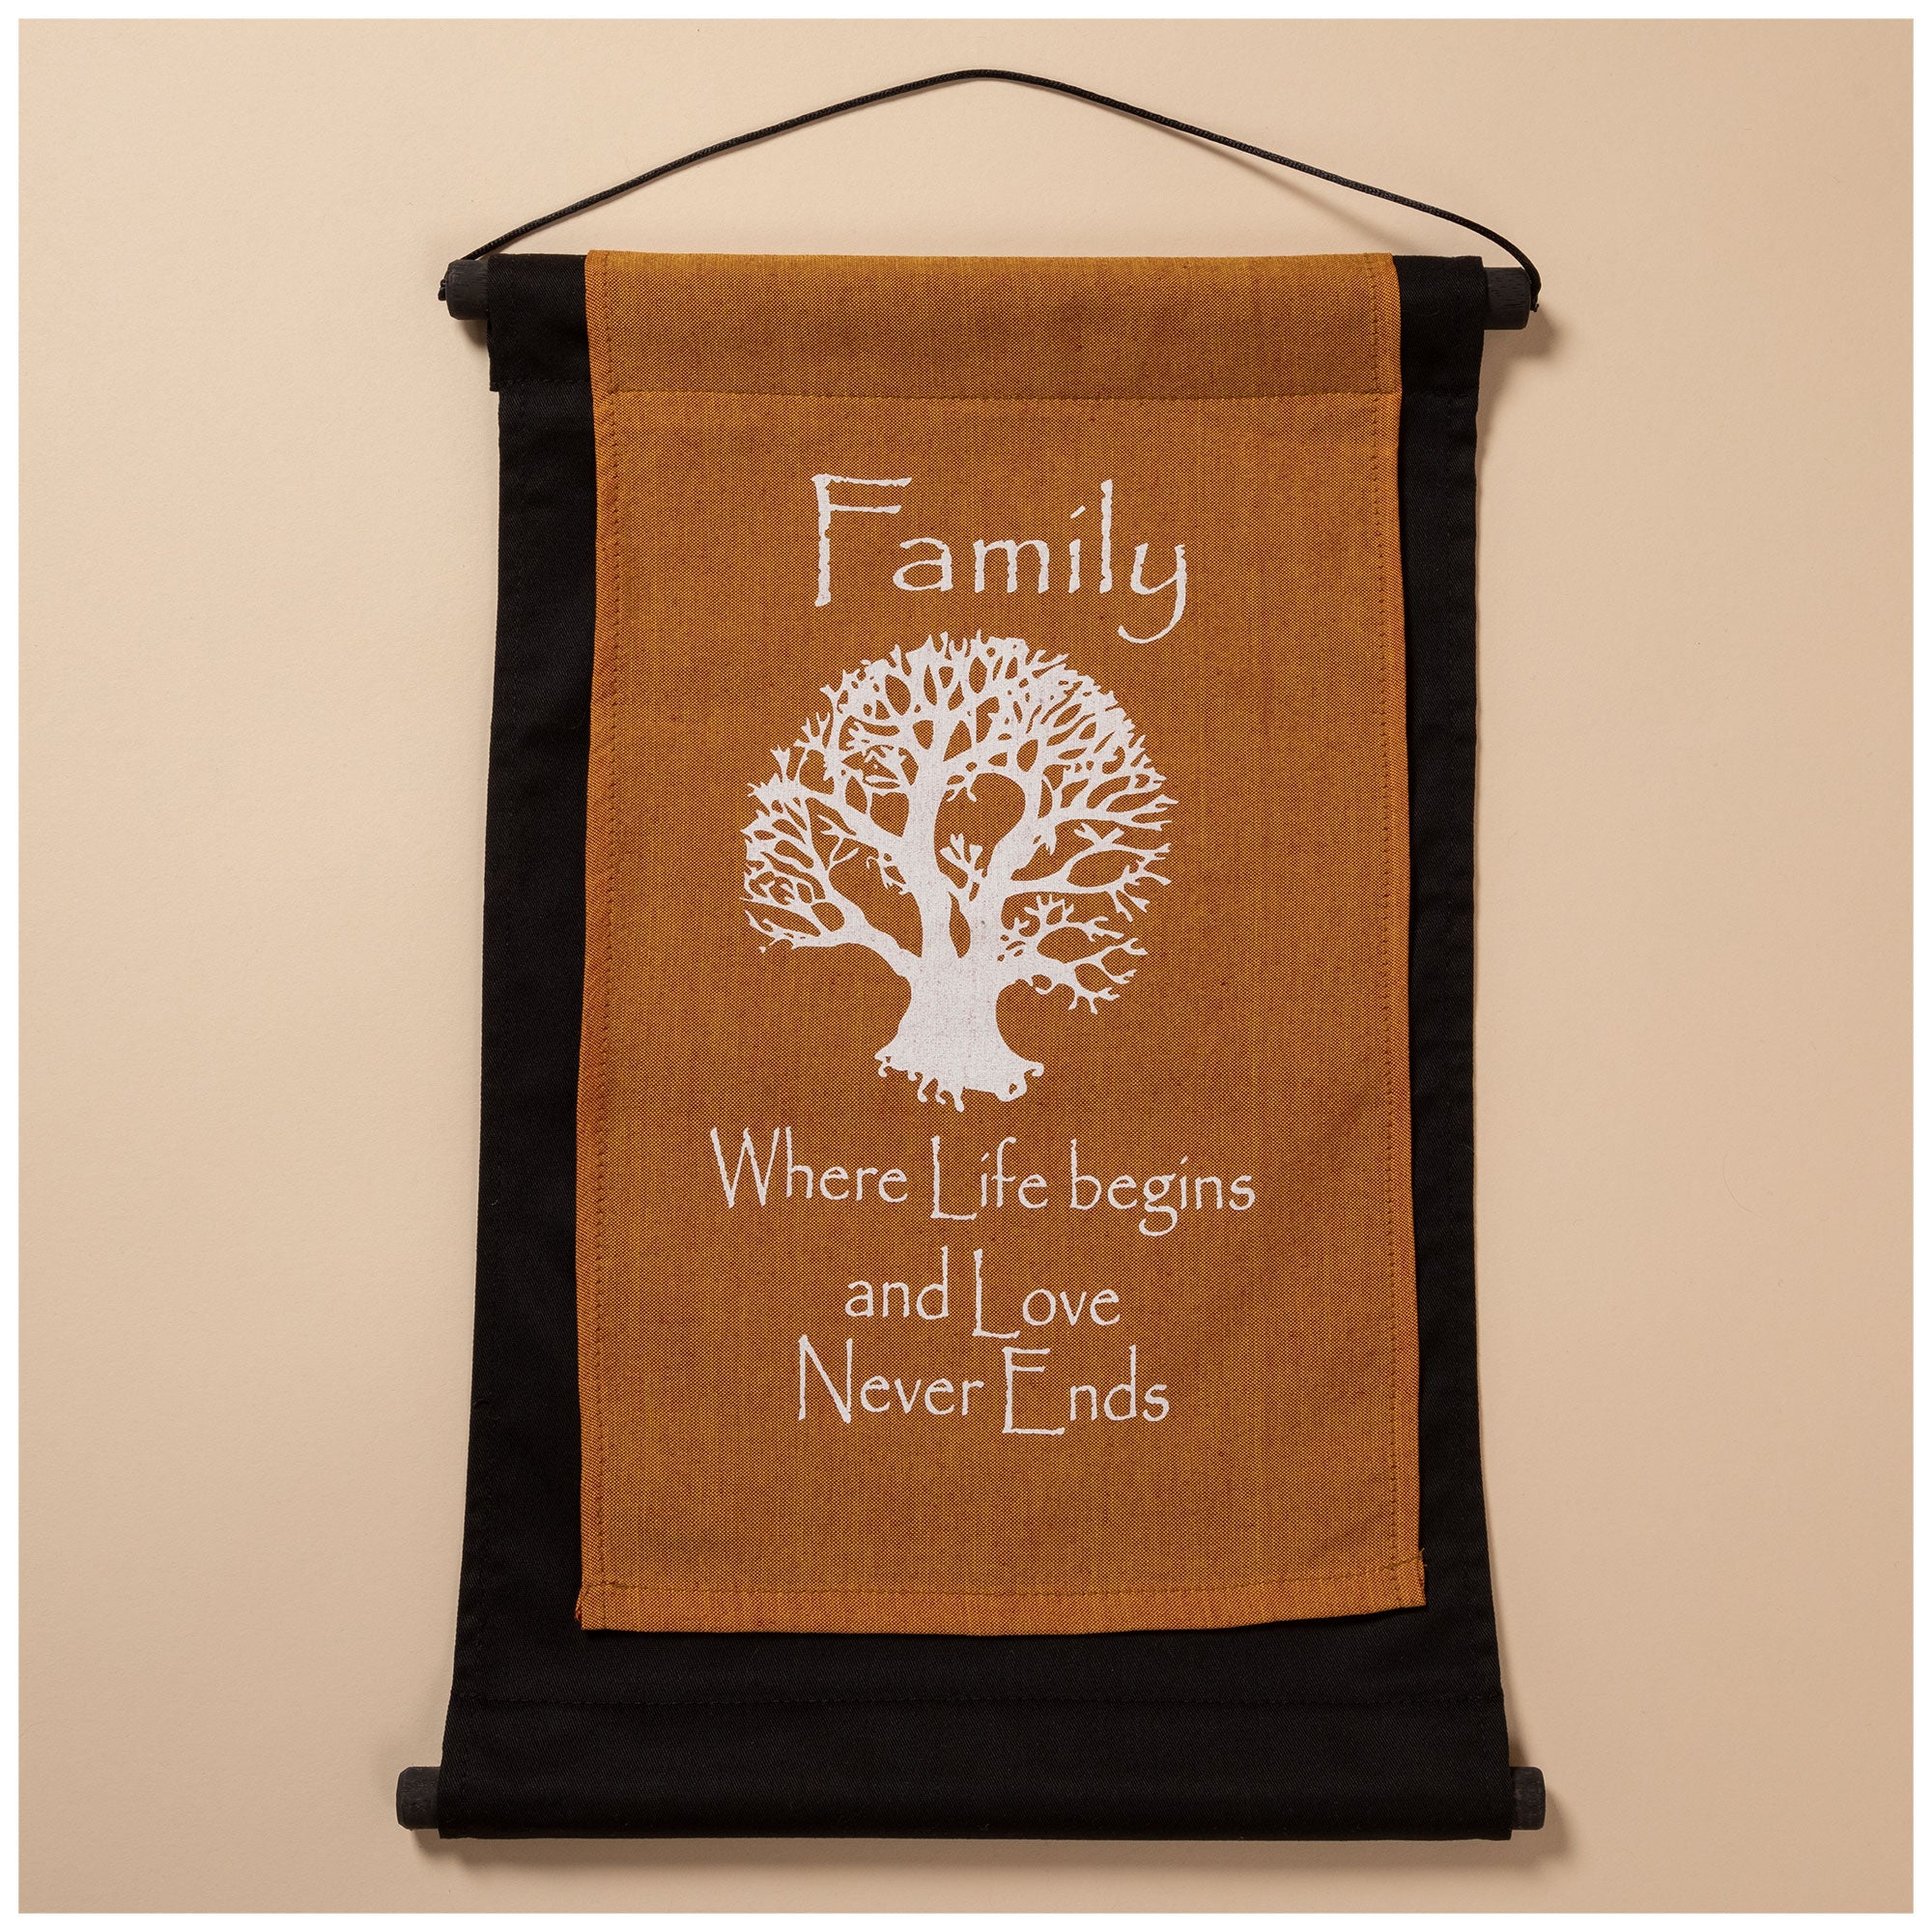 Inspirational Words Scroll Banner - Family